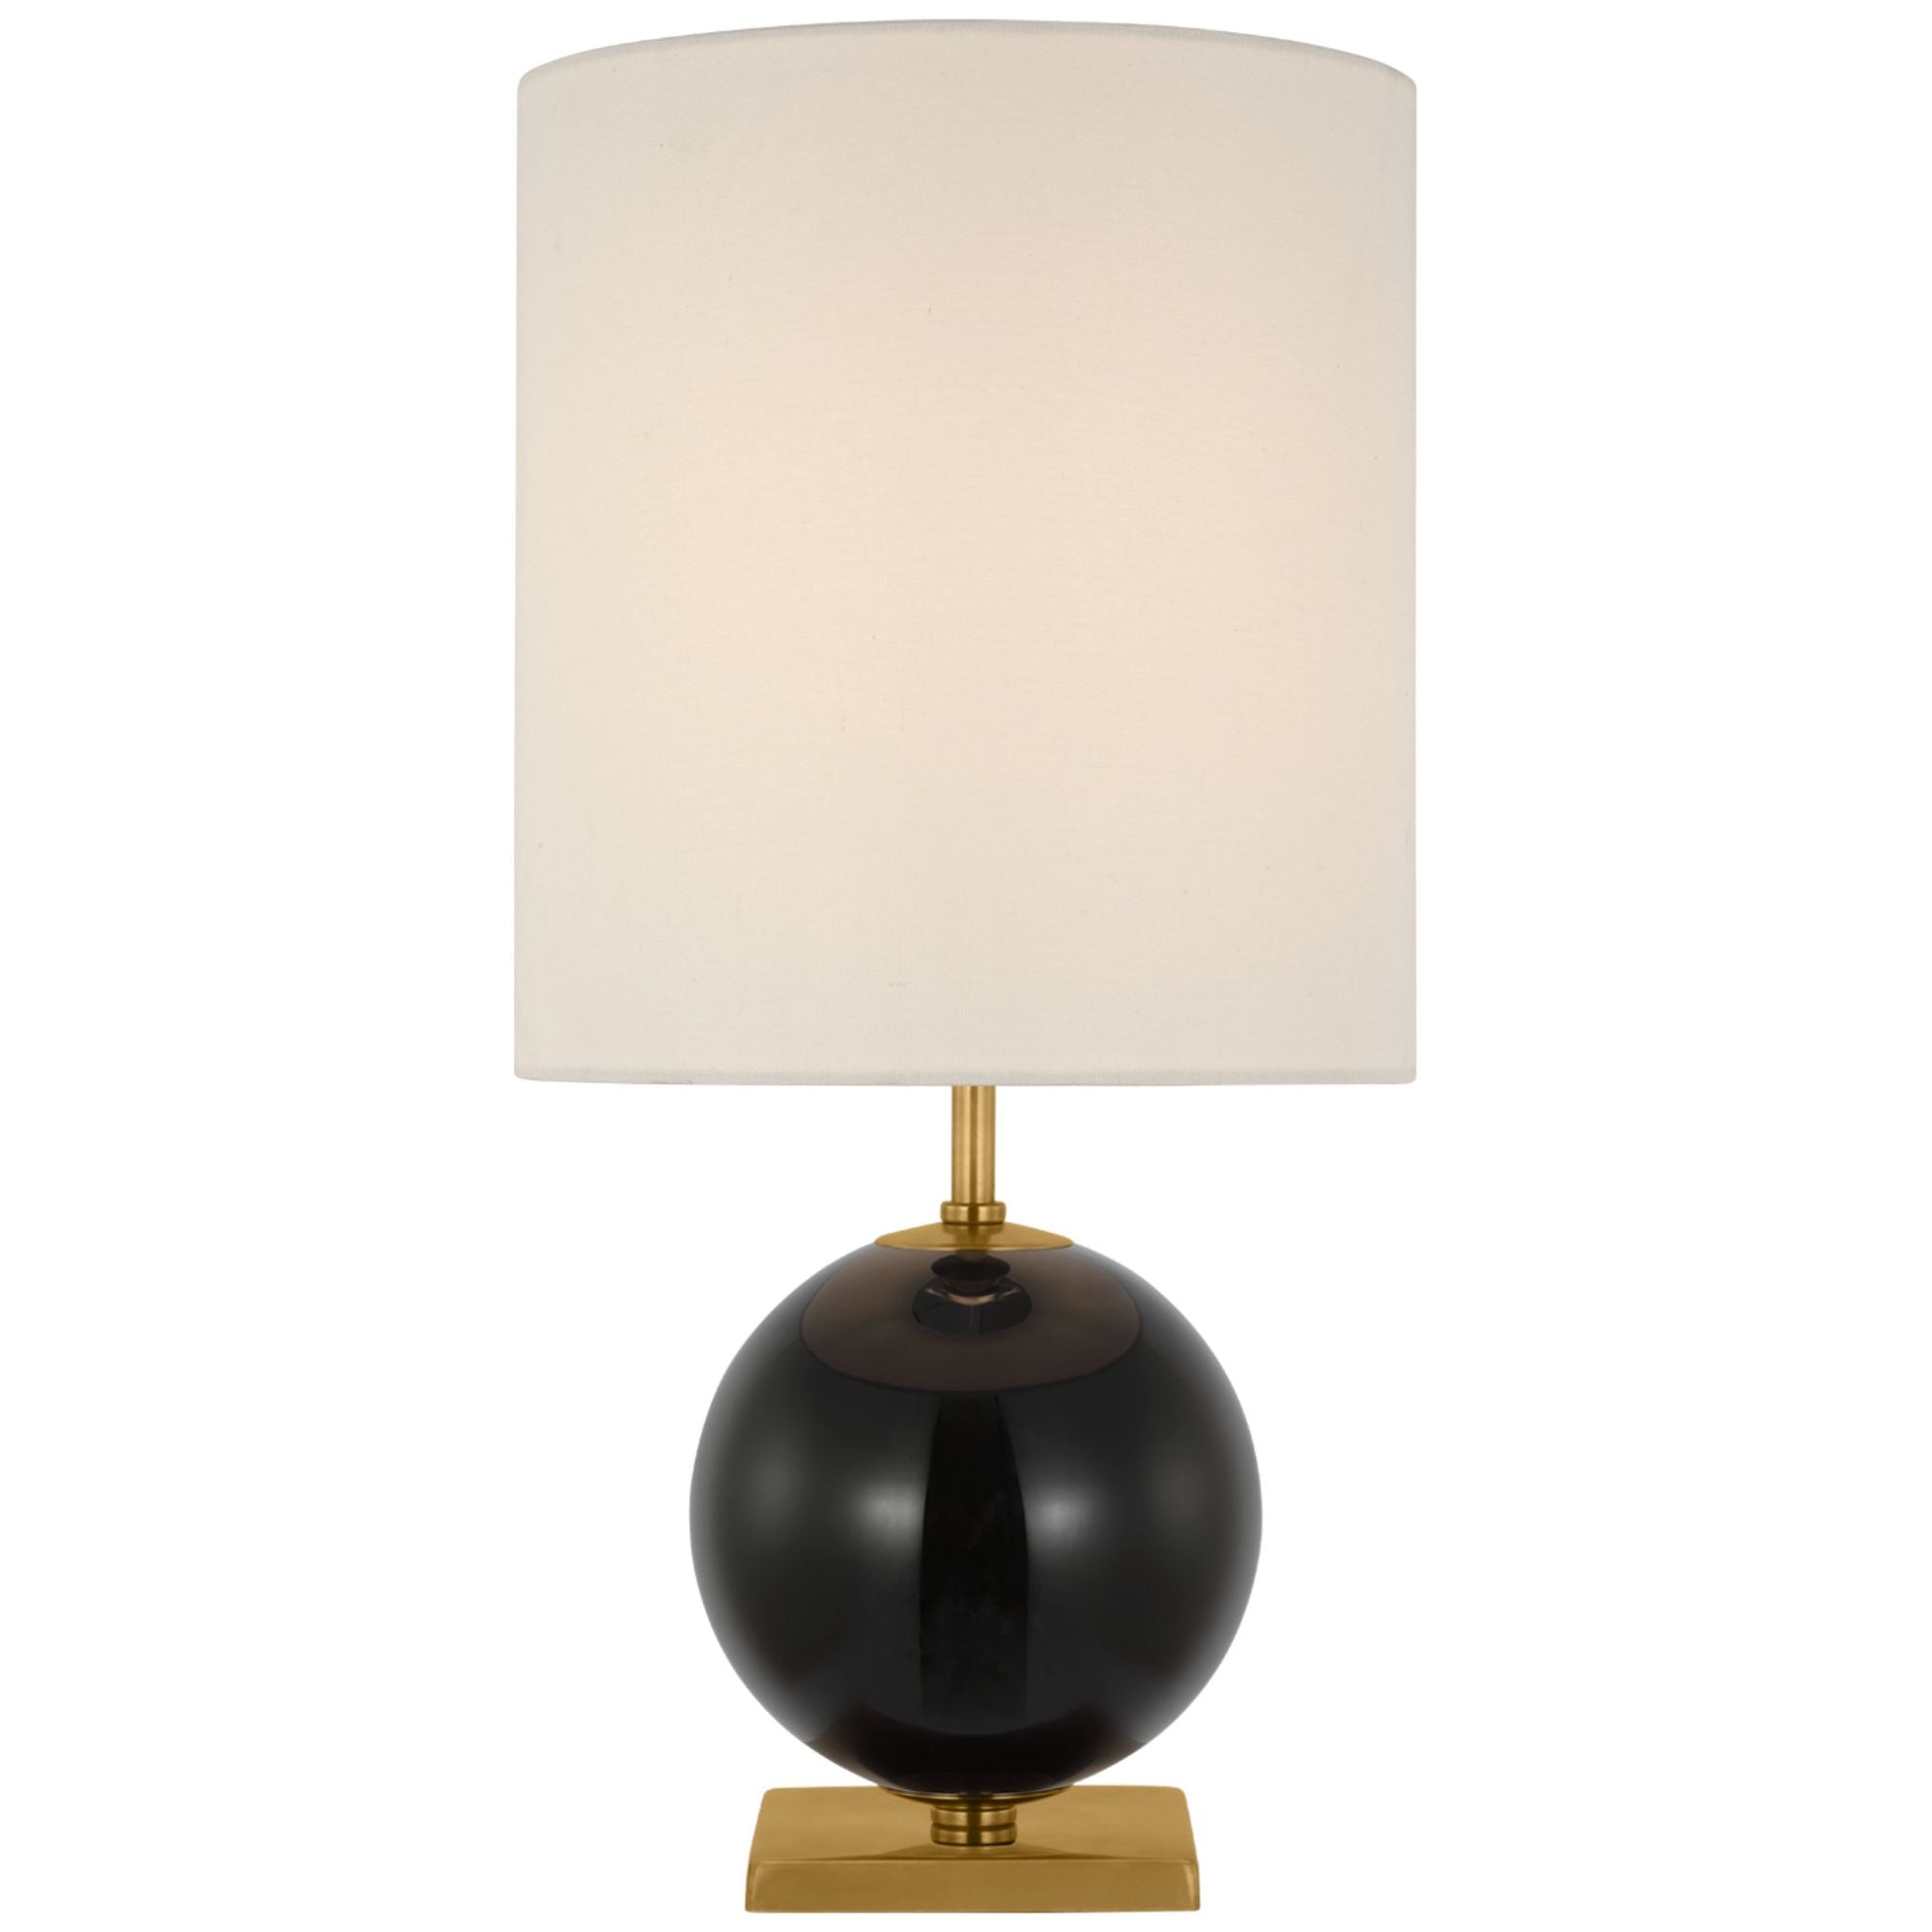 kate spade new york Elsie Small Table Lamp in Black Painted Glass with Linen Shade